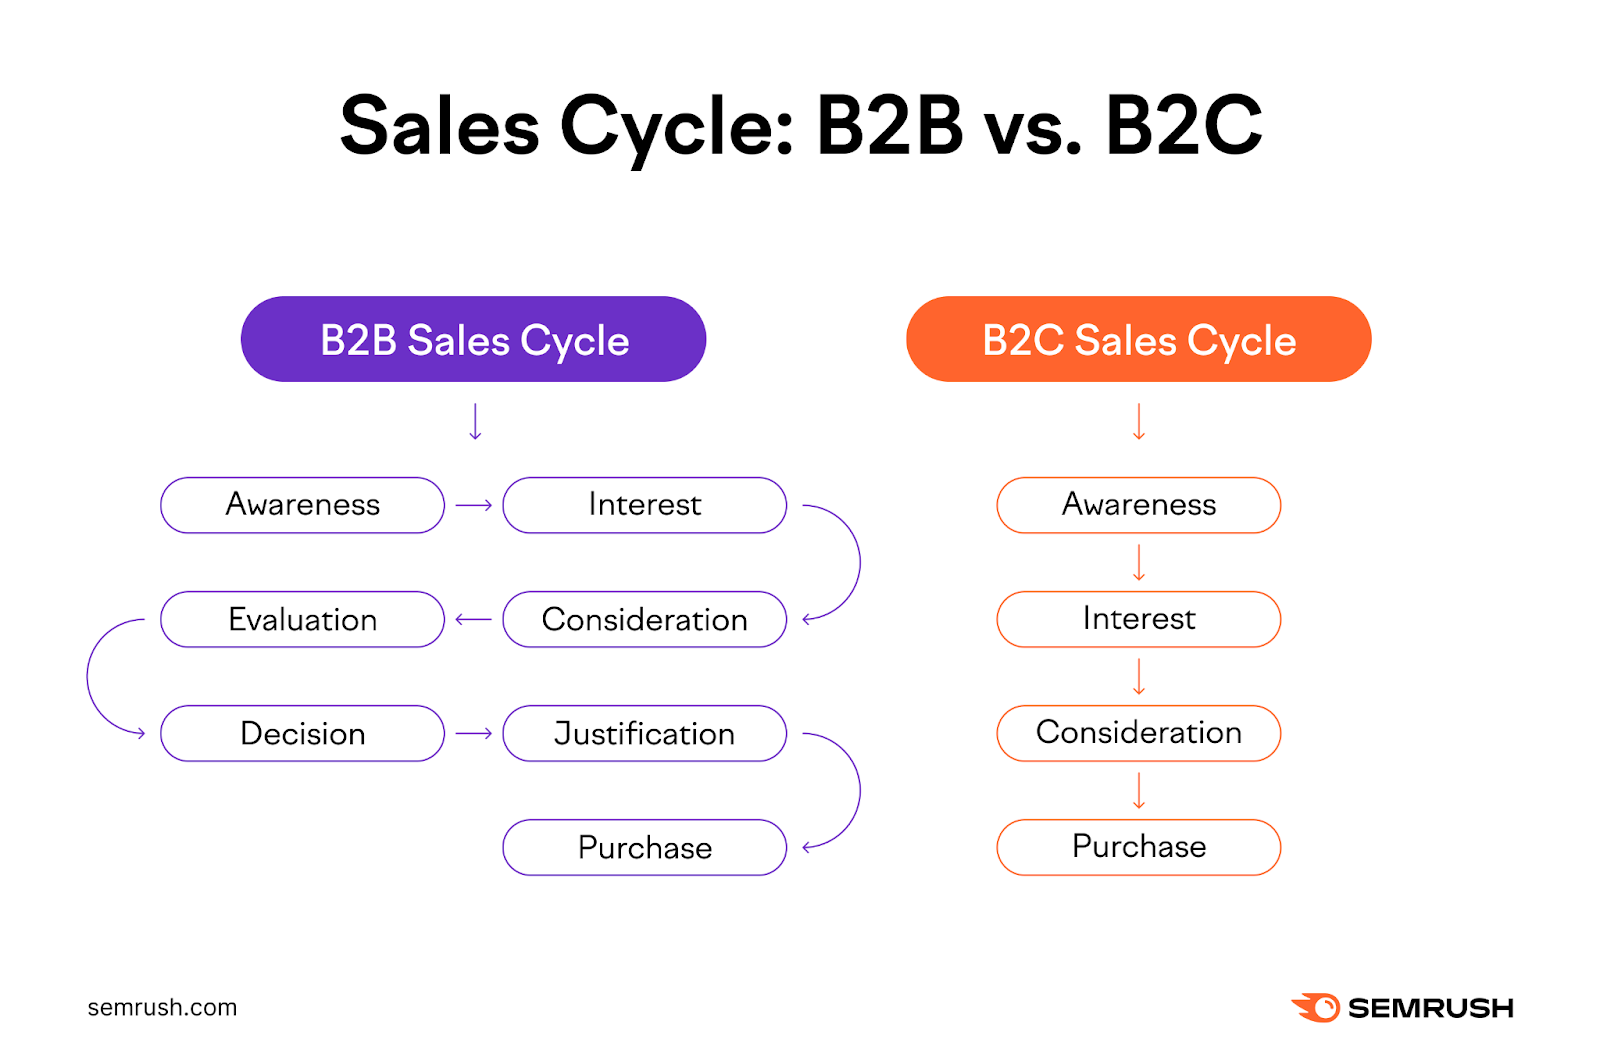 B2B income  rhythm  is awareness, interest, evaluation, consideration, decision, justification, purchase. B2C income  rhythm  is awareness, interest, consideration, purchase.